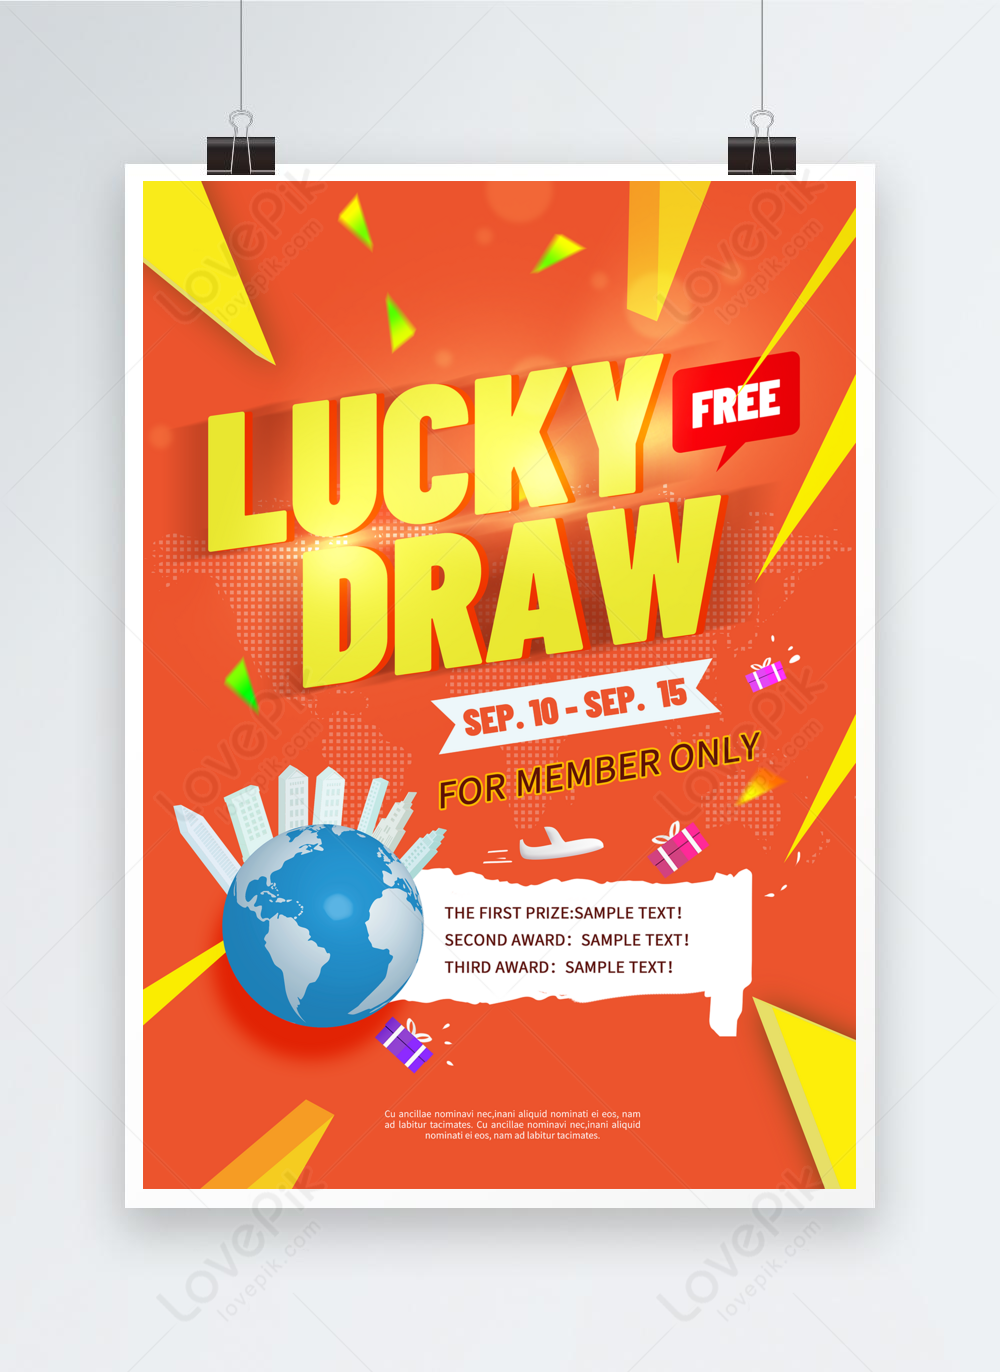 Online Lucky Draw Tools: 7 Best Free Contest Random Name Pickers-saigonsouth.com.vn